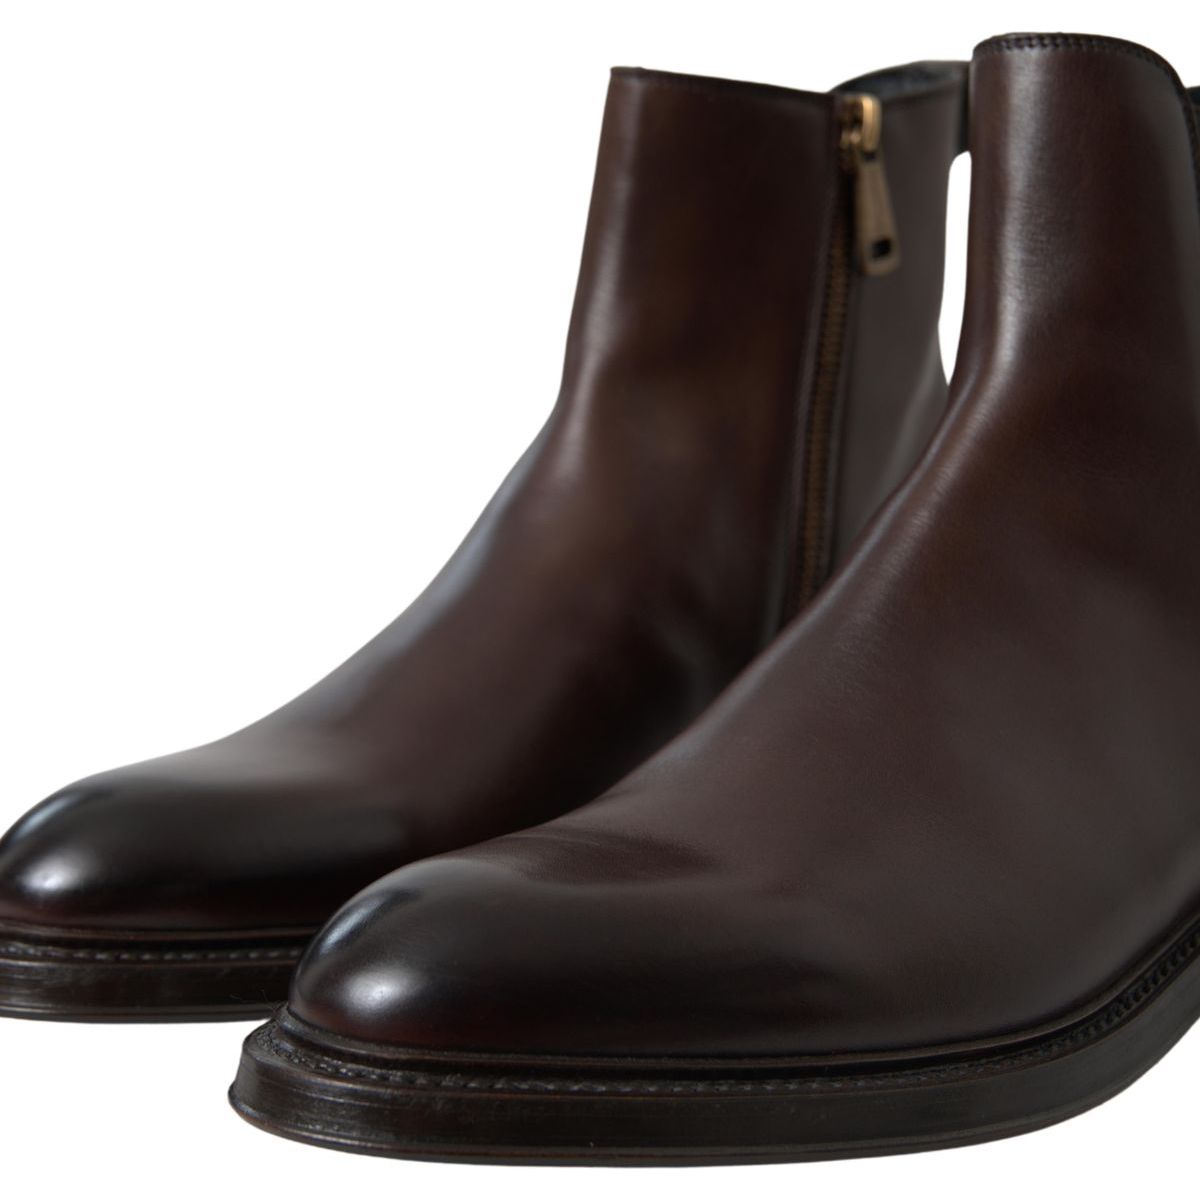 Dolce & Gabbana Elegant Leather Chelsea Boots brown-leather-chelsea-mens-boots-shoes 465A8387-13c150e3-1bb.jpg